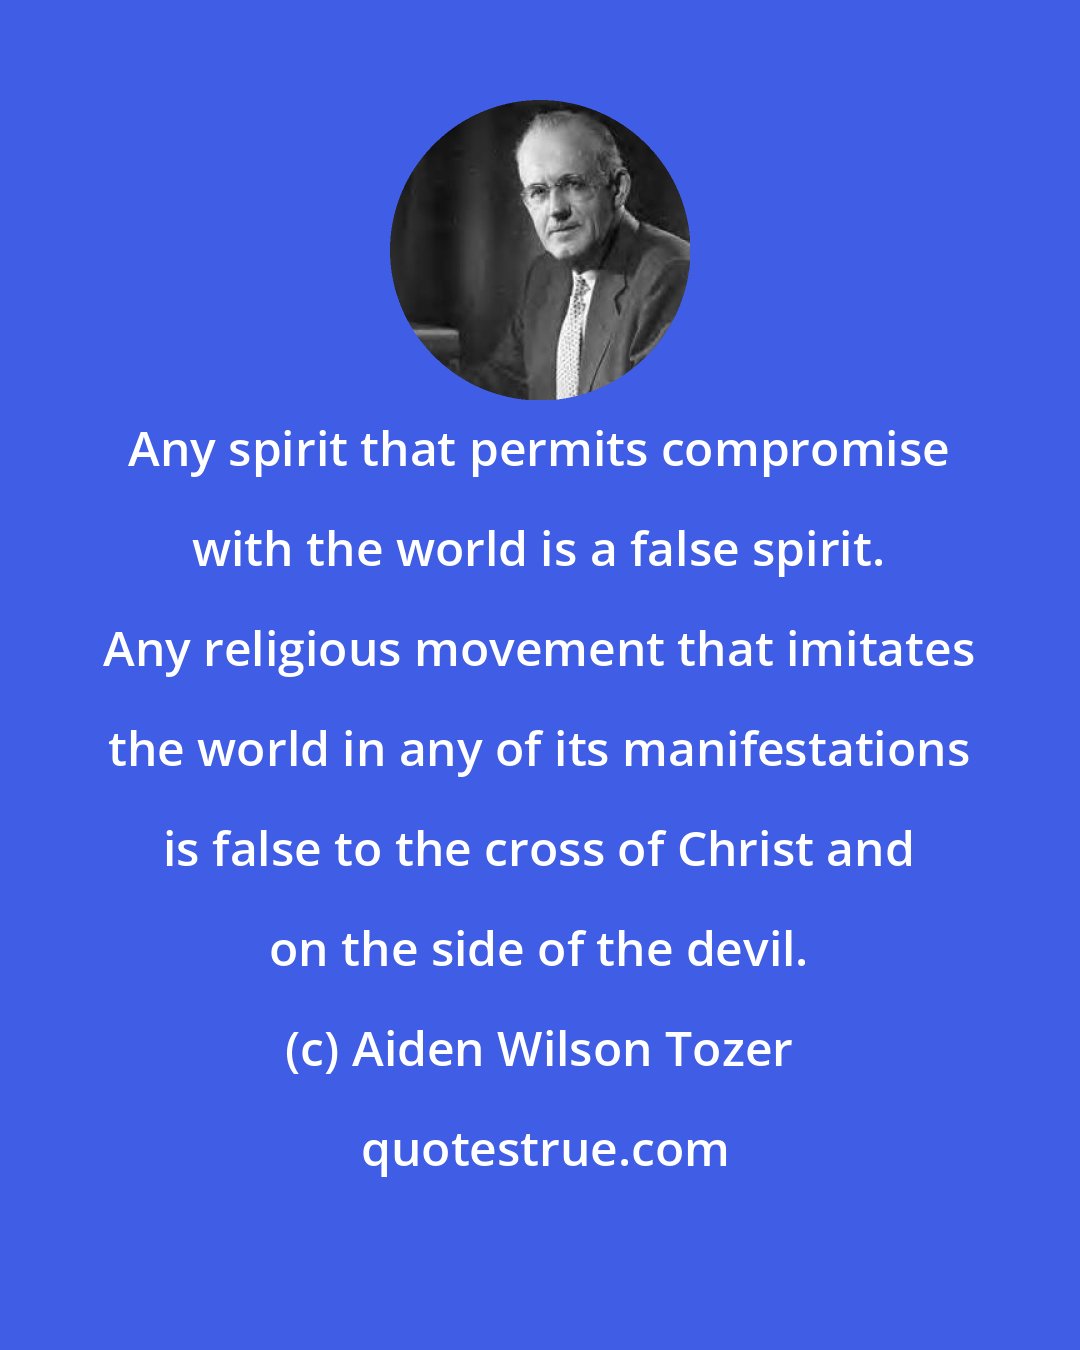 Aiden Wilson Tozer: Any spirit that permits compromise with the world is a false spirit. Any religious movement that imitates the world in any of its manifestations is false to the cross of Christ and on the side of the devil.